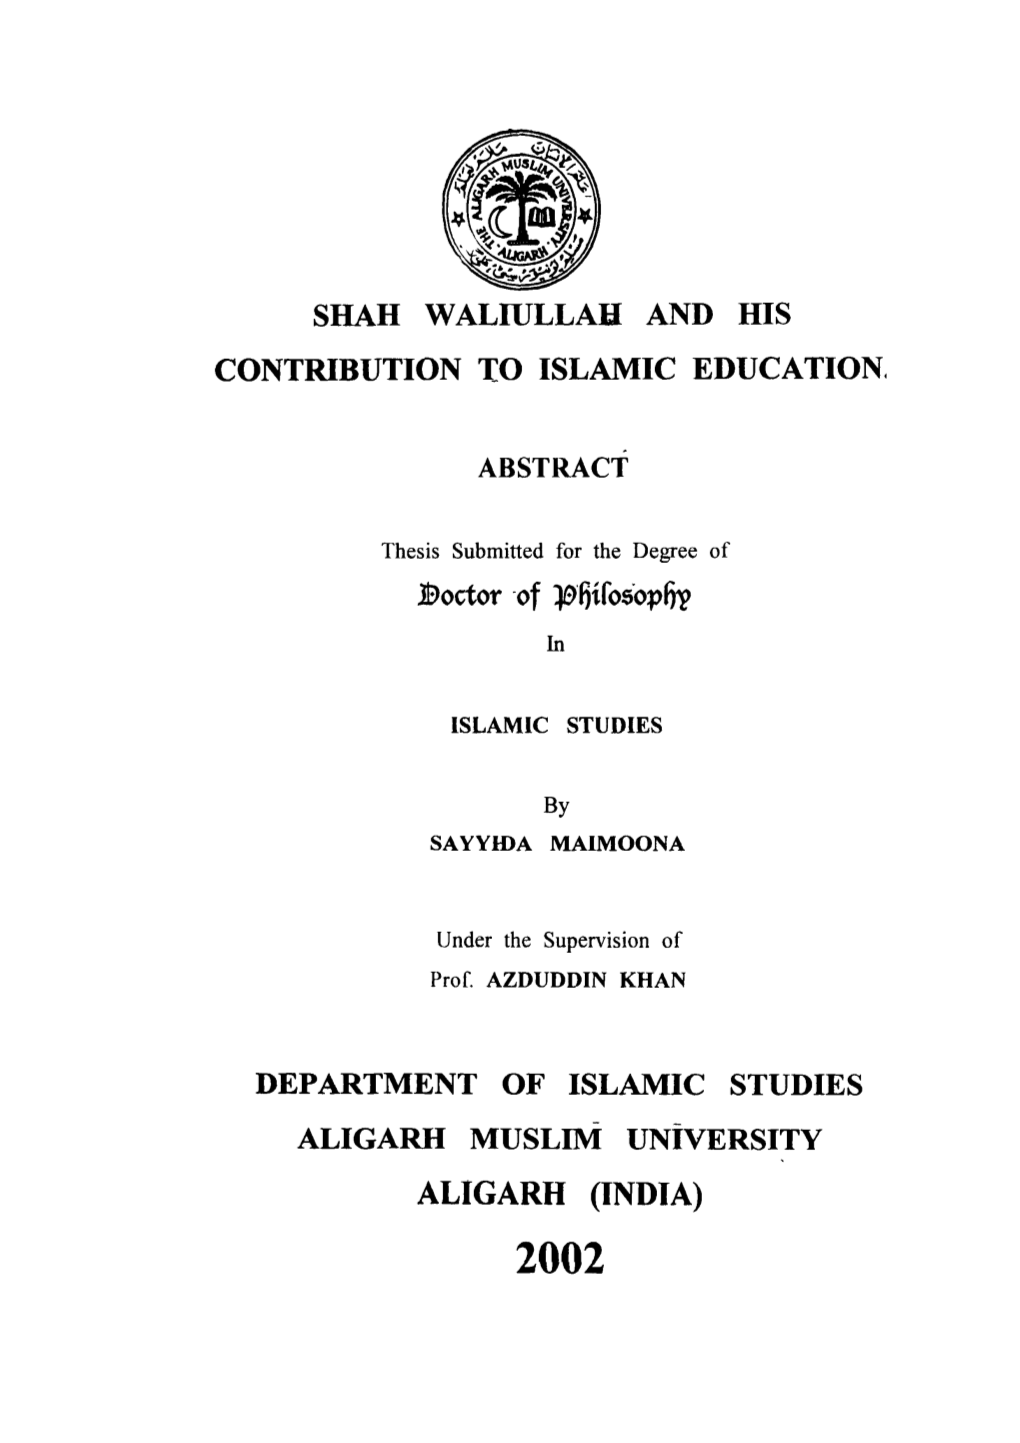 Shah Walhjllah and His Contribution to Islamic Education